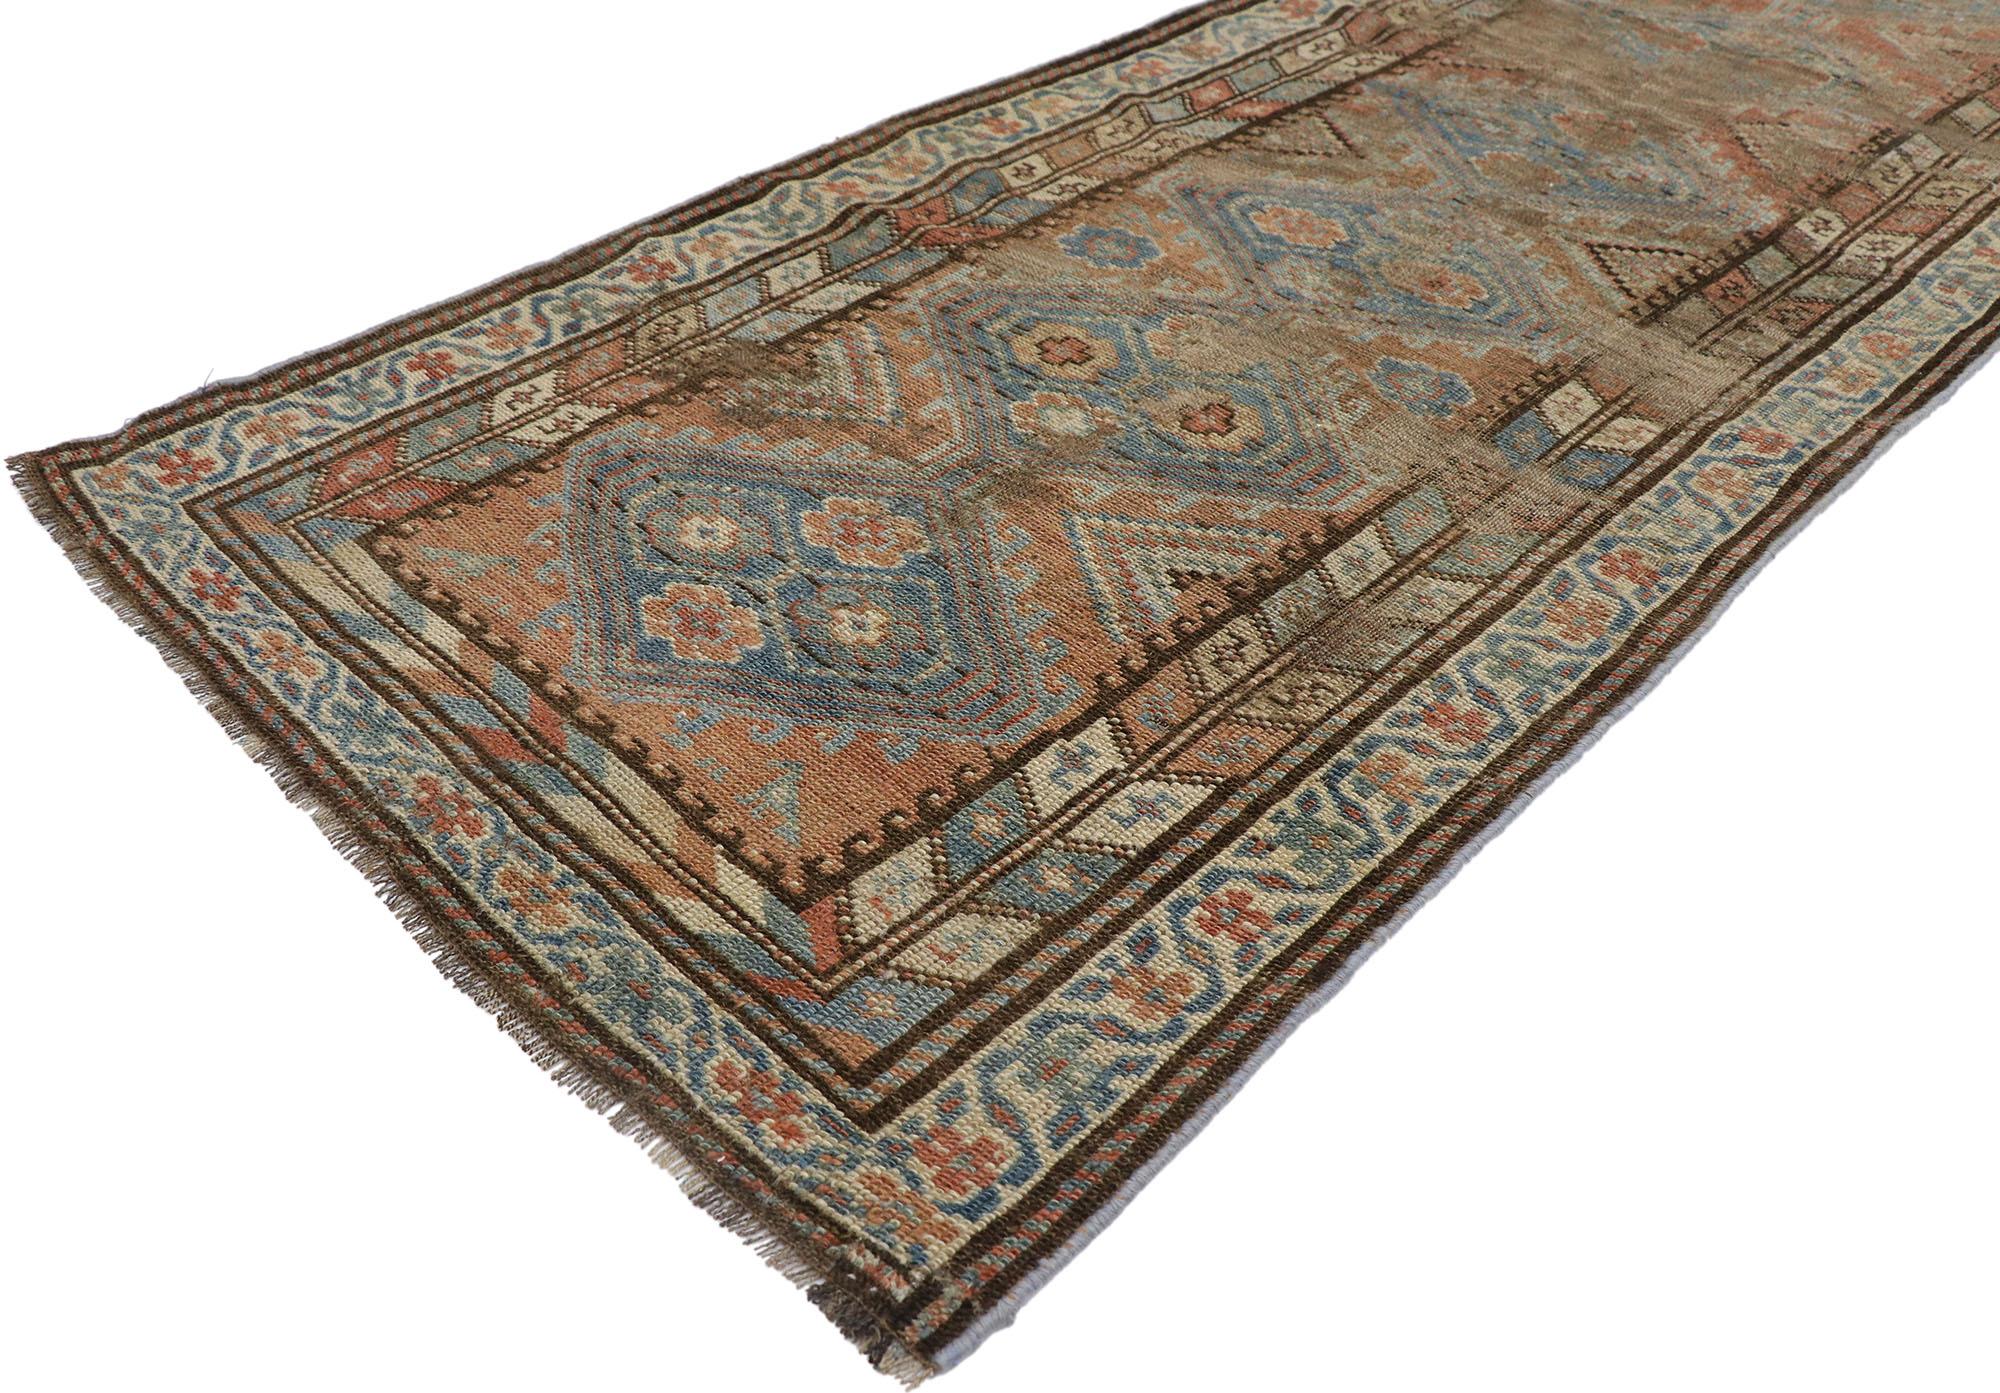 60890 distressed antique Persian Shiraz Runner 02'07 x 08'08. With its warm hues and rugged beauty, this hand-knotted wool antique Persian Shiraz runner will take on a curated lived-in look that feels timeless while imparting a sense of warmth and